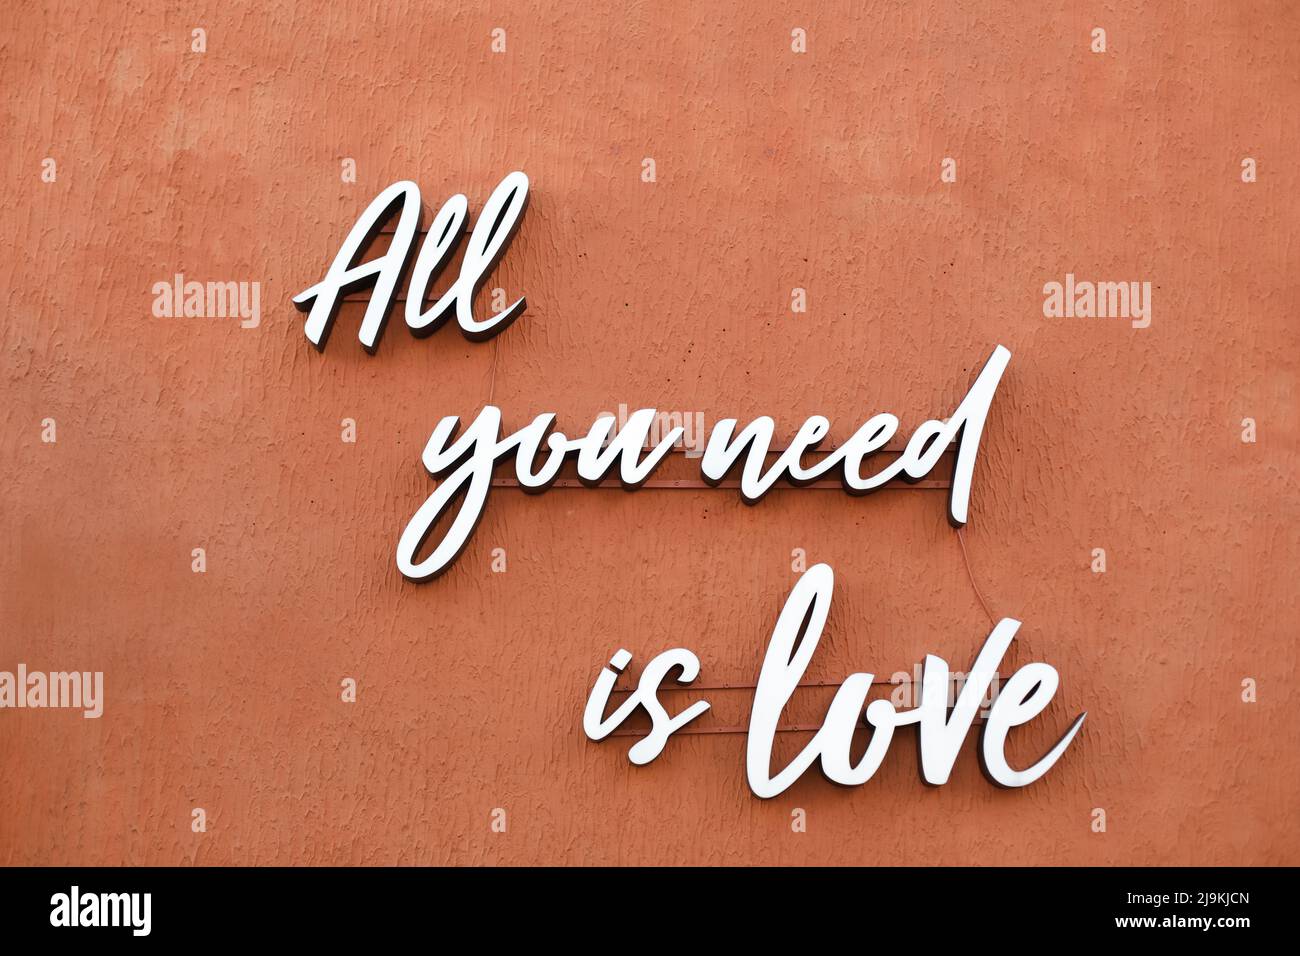 All you need is love - inspirational quote Stock Photo